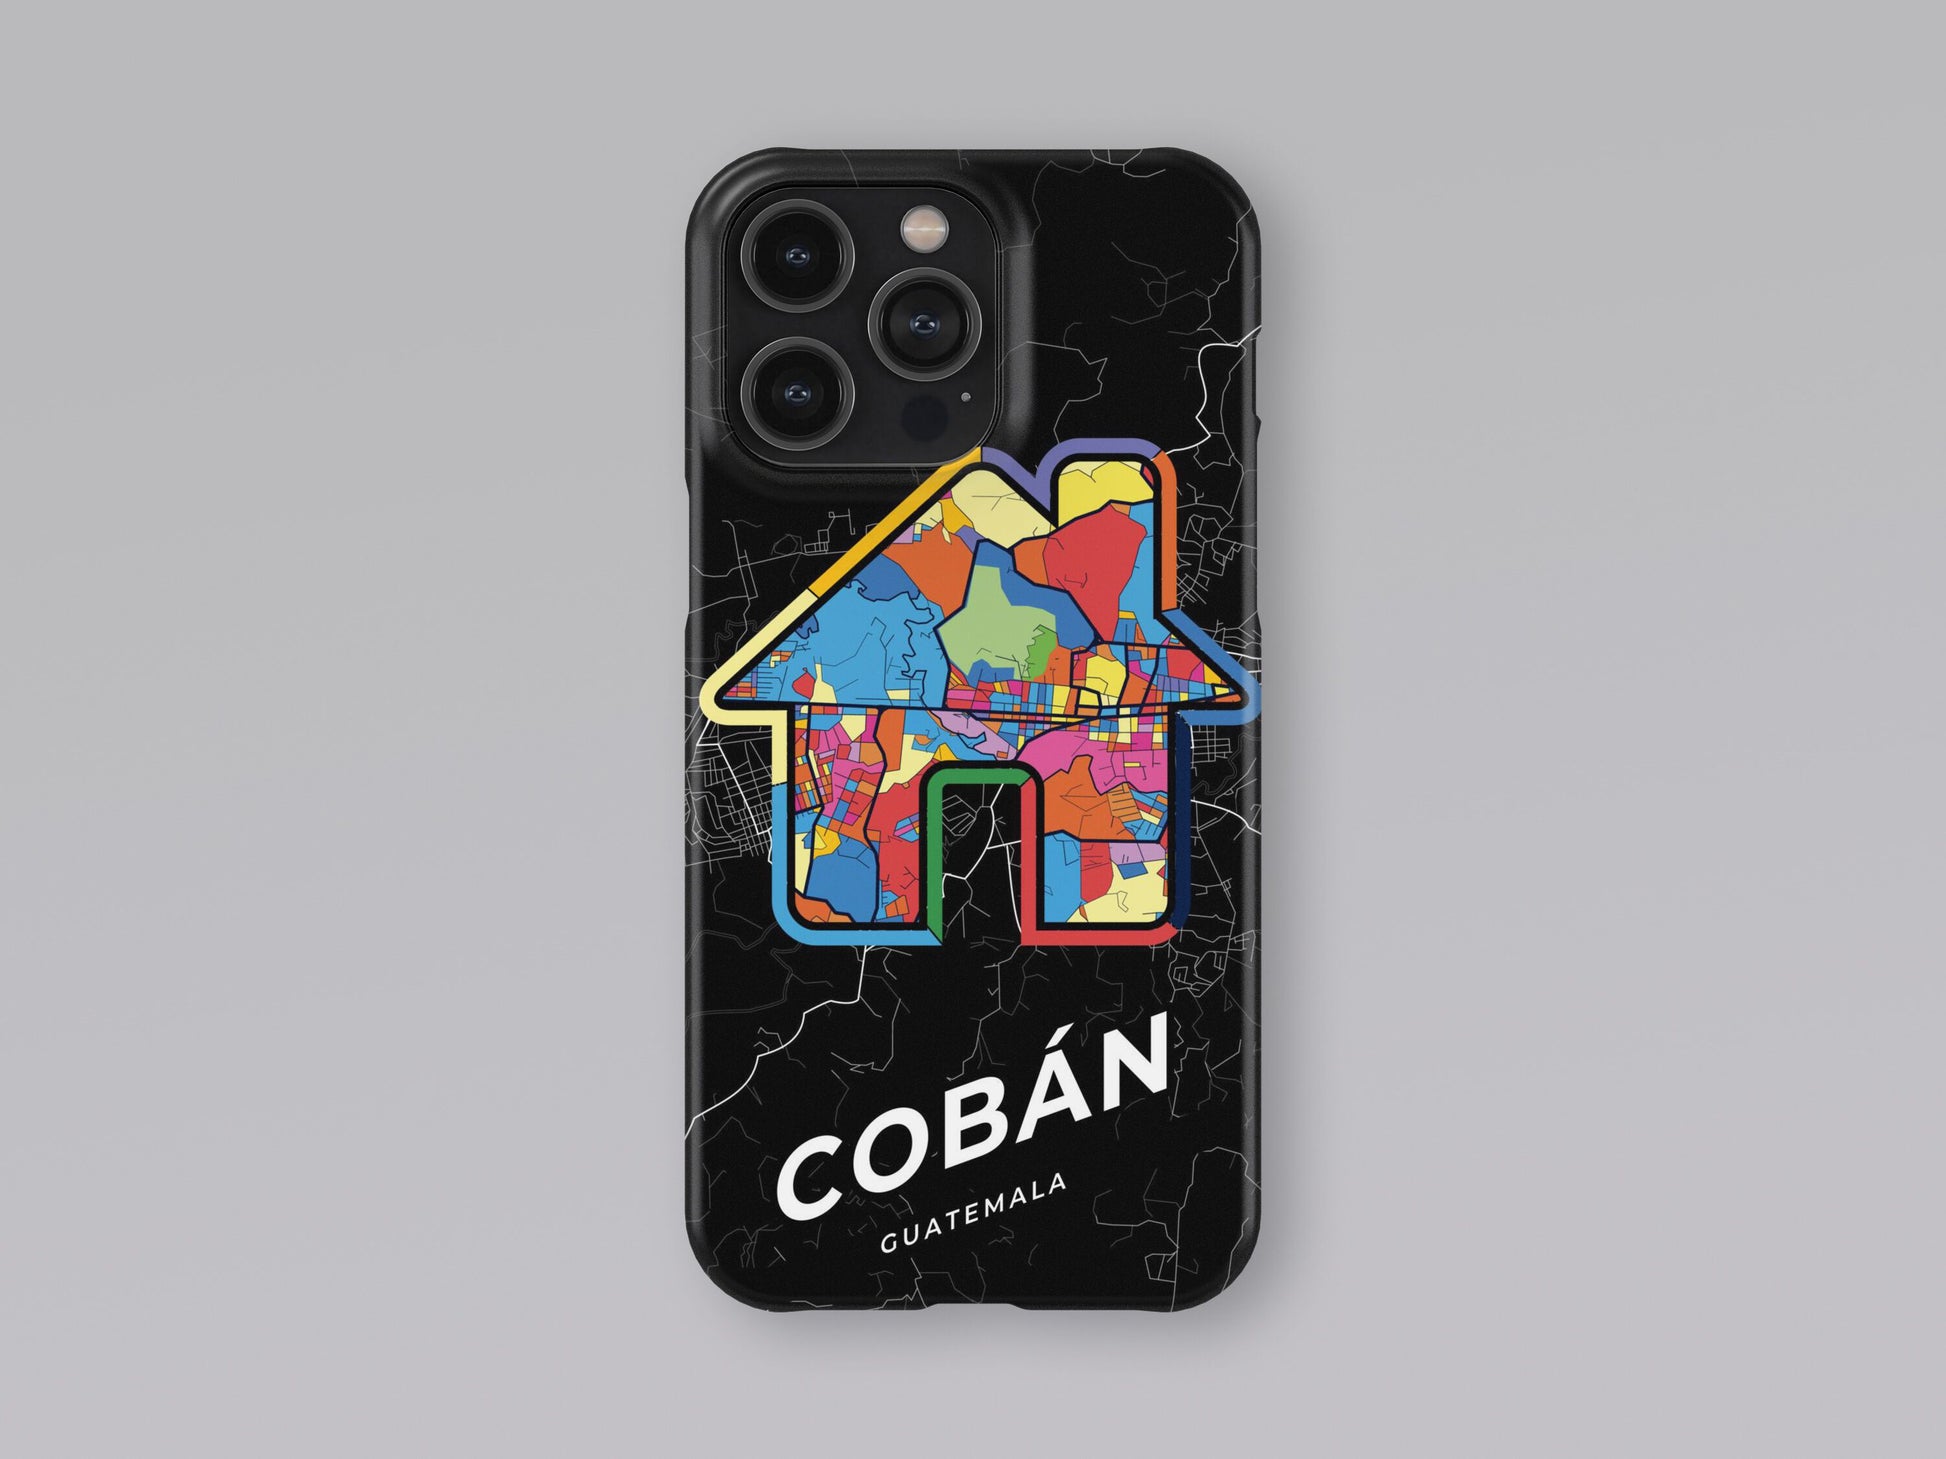 Cobán Guatemala slim phone case with colorful icon. Birthday, wedding or housewarming gift. Couple match cases. 3